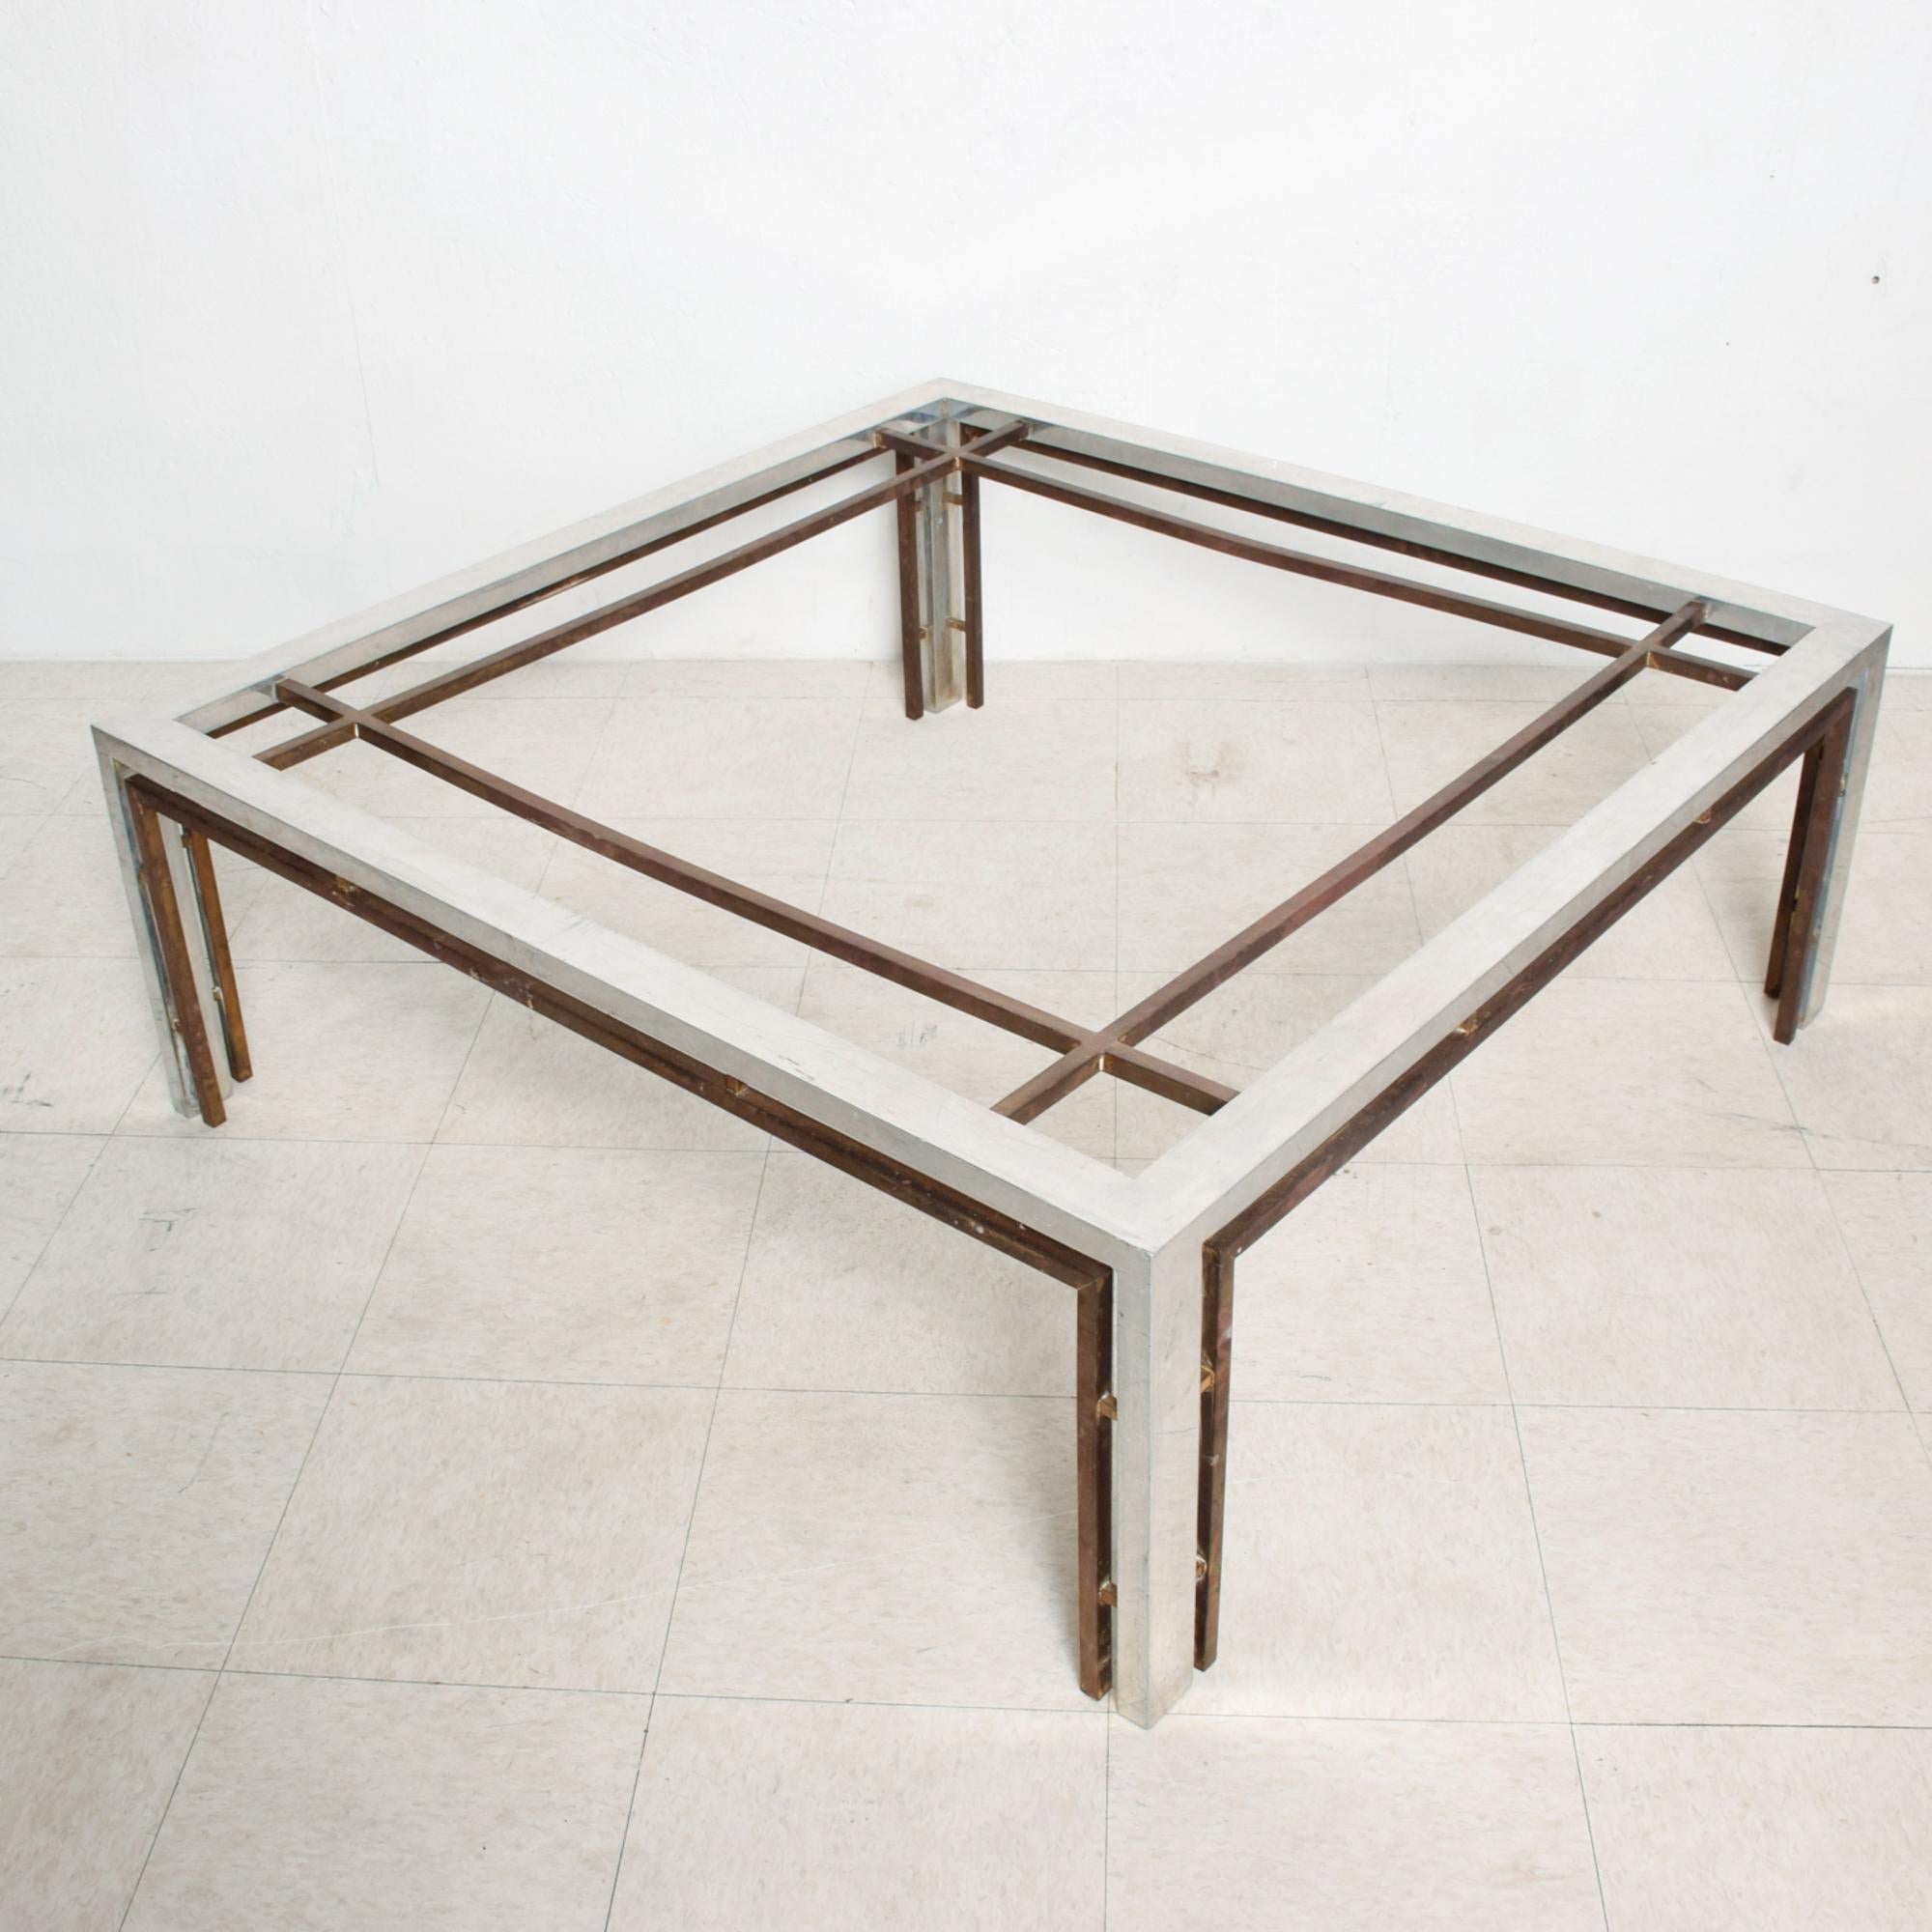 For your consideration: Square coffee table Arturo Pani made in Mexico circa 1960s Modular design
Constructed in aluminum and bronze. Glass top. 
Attributed to Arturo Pani. Unmarked.
Dimensions: 43.5 x 43.5 x 15 .88 inches
Original vintage